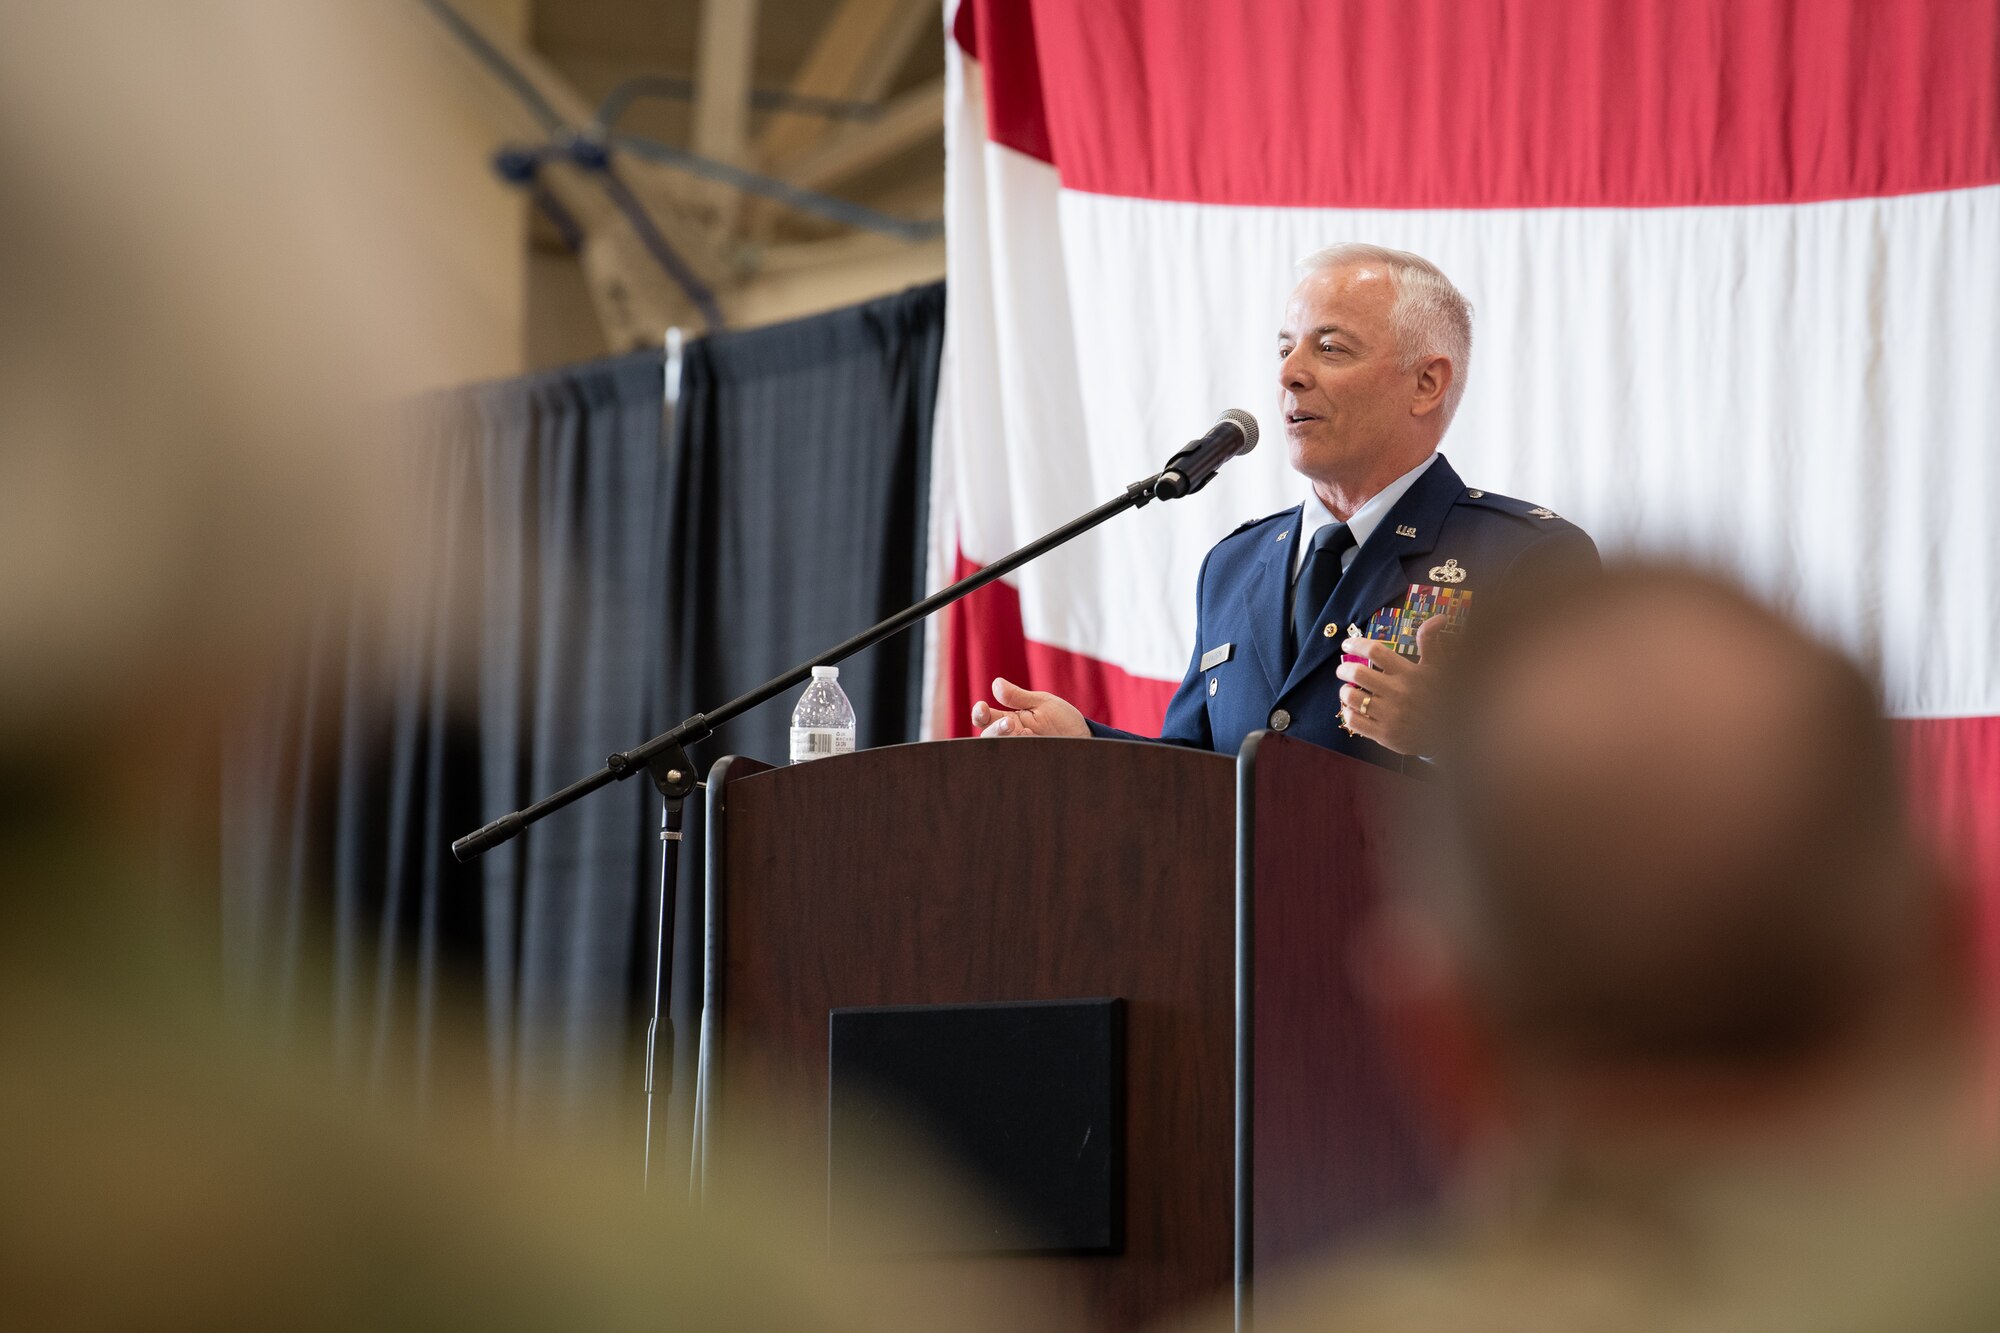 Col. Douglas D. Hayworth, 137th Special Operations Wing (137th SOW) vice commander, addresses the Airmen of the 137th SOW during his retirement ceremony at Will Rogers Air National Guard Base in Oklahoma City, May 4, 2018. Hayworth retired after serving more than 30 years with the Wing. (U.S. Air National Guard Photo by Senior Airman Jordan Martin)